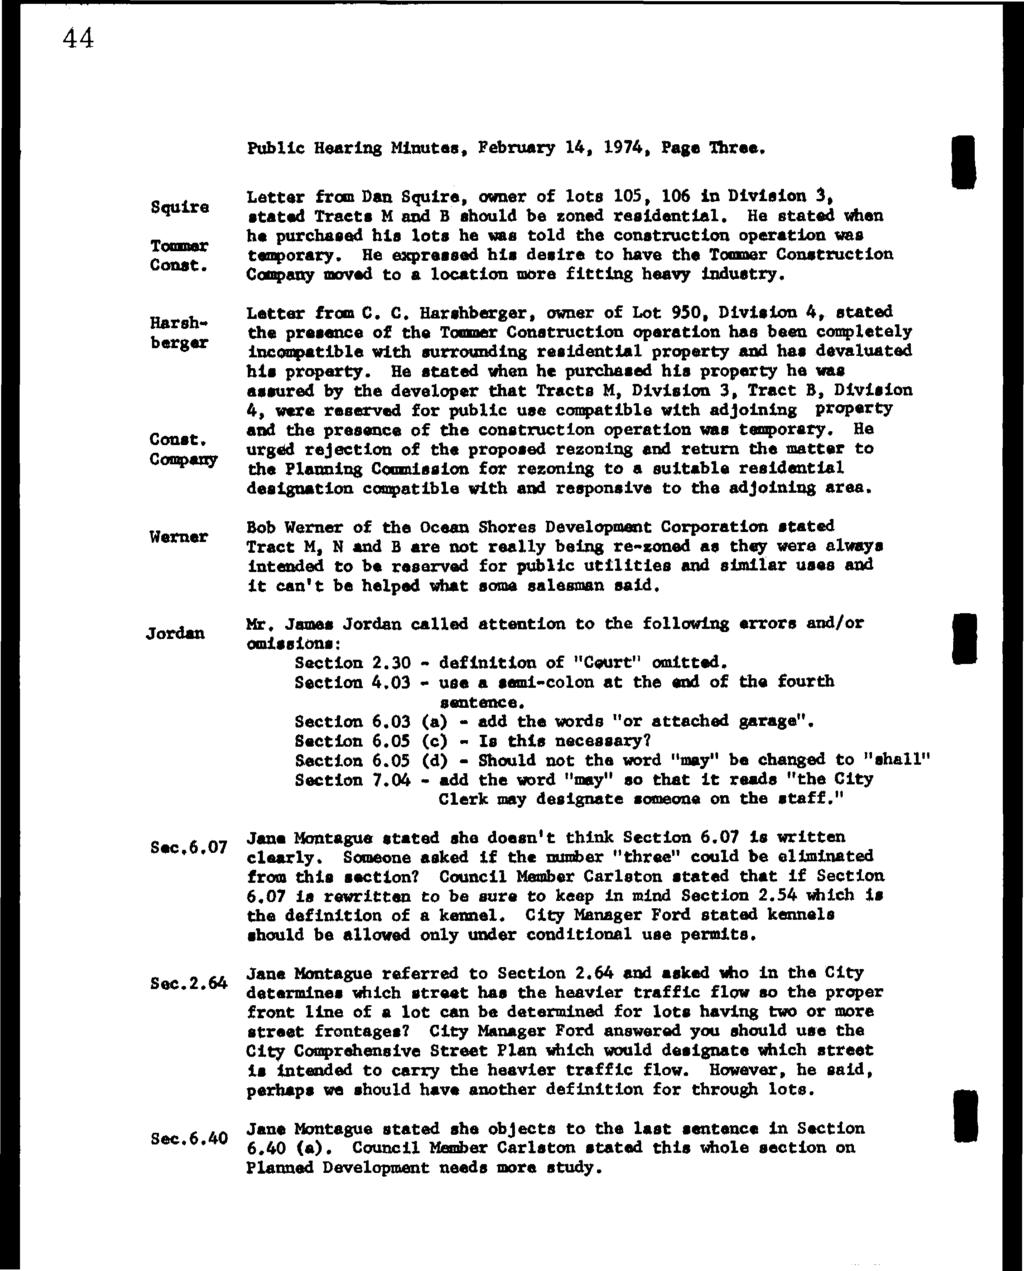 44 Squre Tommer Const. Harshberger Const. Company Werner Jordan Sec,6,07 Sec.2.64 Sec.6.40 Publc Hearng Mnutes, February 14, 1974, Page Three.